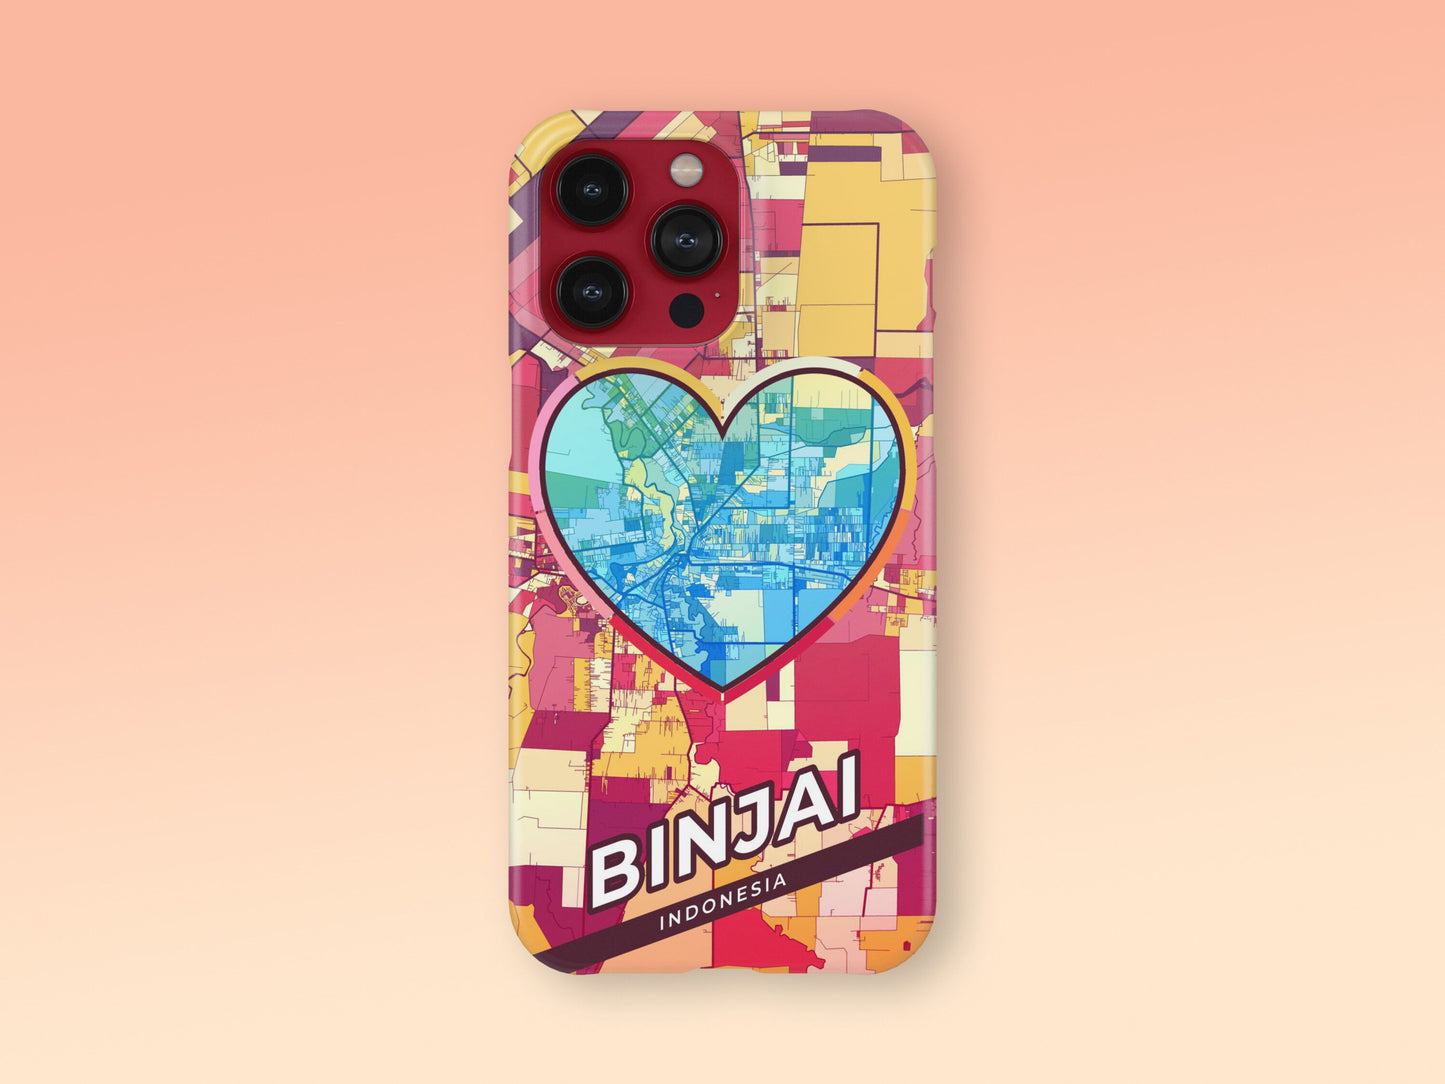 Binjai Indonesia slim phone case with colorful icon. Birthday, wedding or housewarming gift. Couple match cases. 2